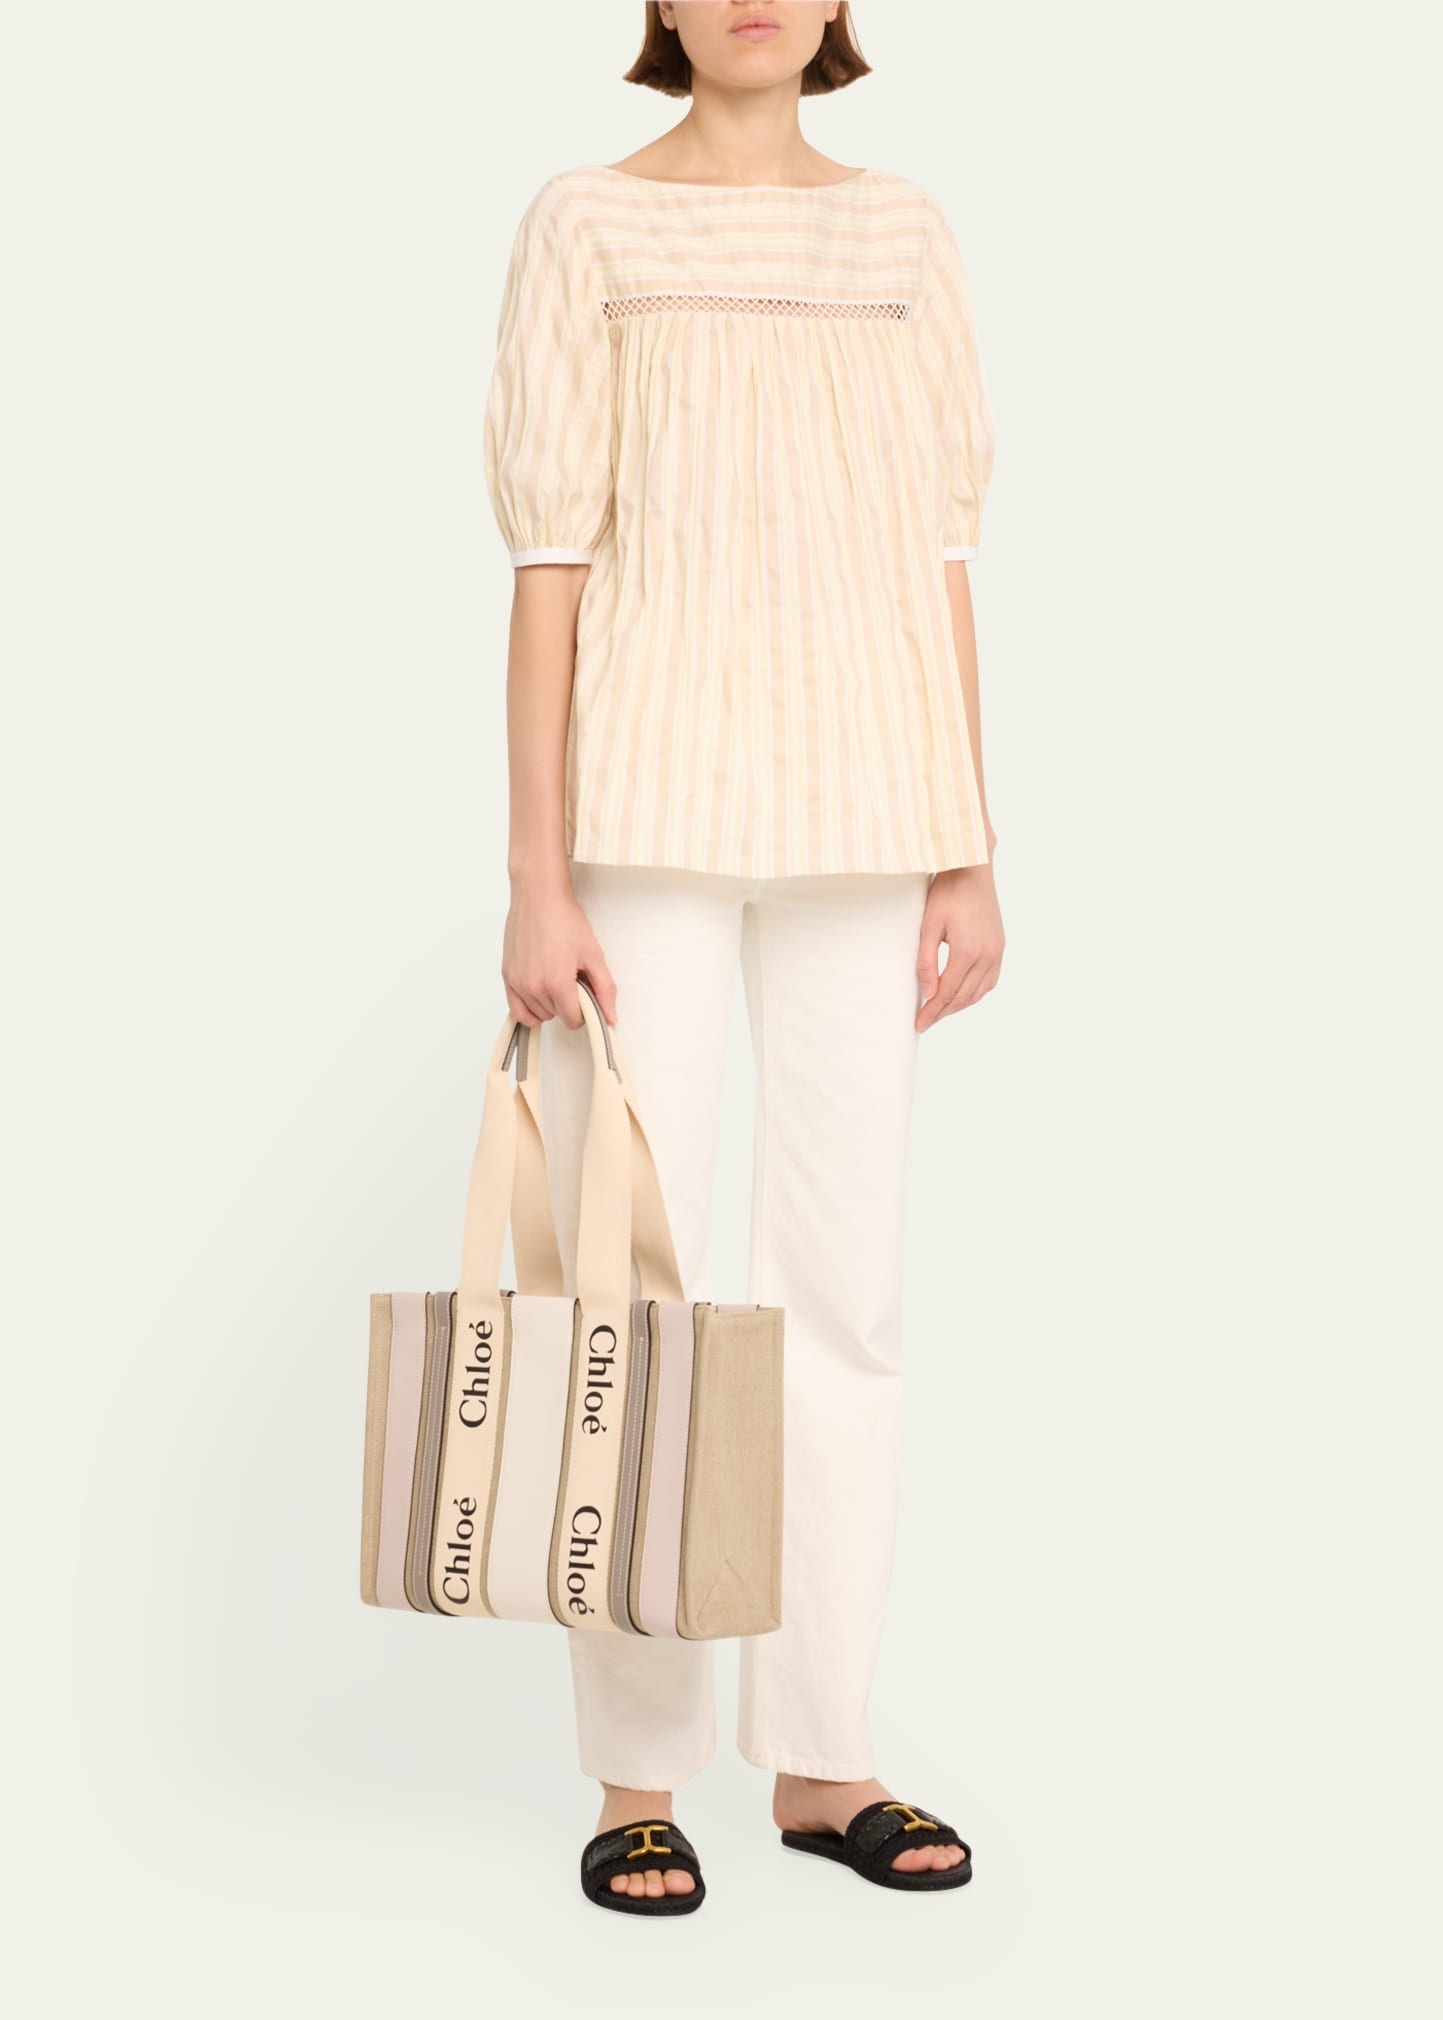 x High Summer Woody Medium Tote Bag in Striped Linen and Leather - 5